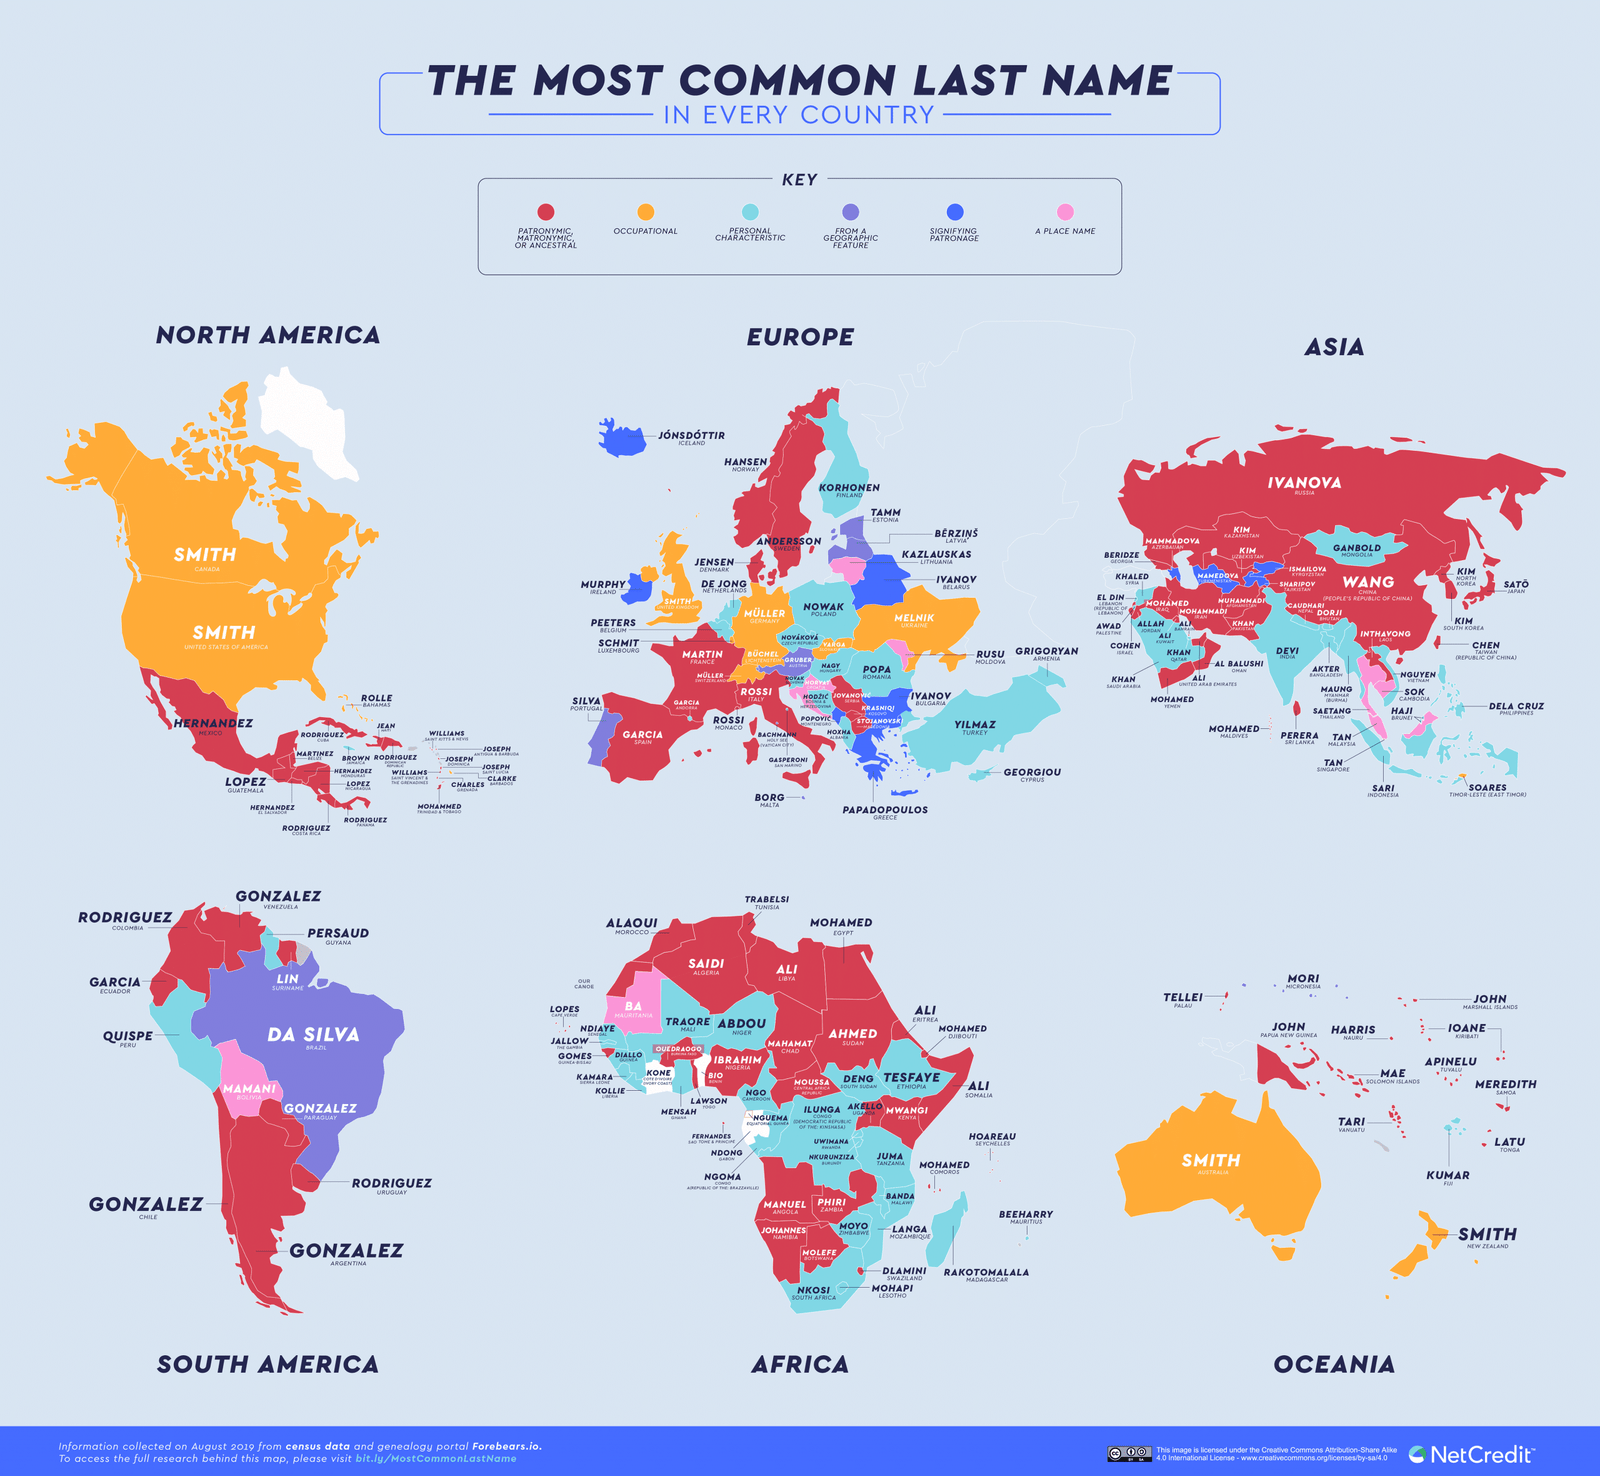 01_The-most-common-last-name-in-every-country_FullMap-2.